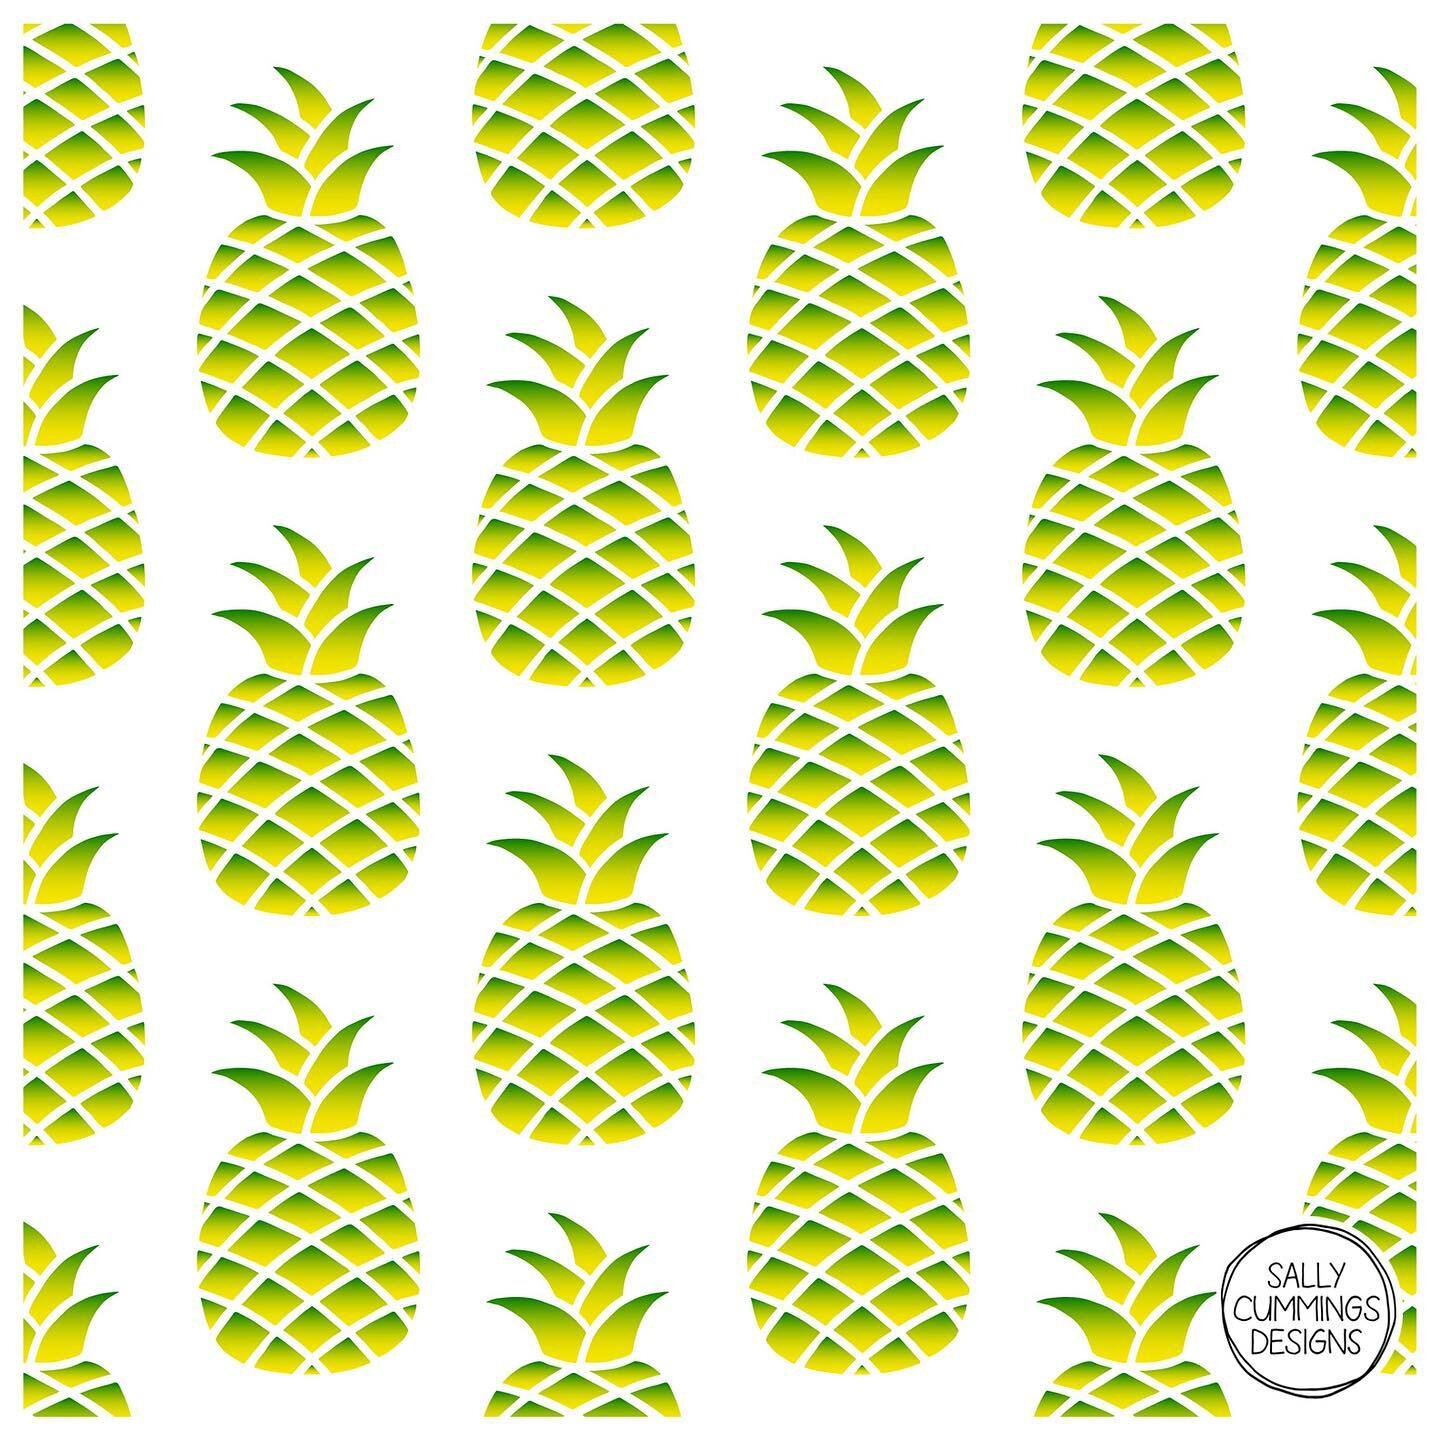 This fresh pineapple pattern always makes me smile 😊 Digitally coloured from a hand drawn sketch. Now available in my Society6 and Redbubble stores 🍍

#sallycummingsdesigns #society6 #redbubble #patterndesign #textiledesign #surfacedesign